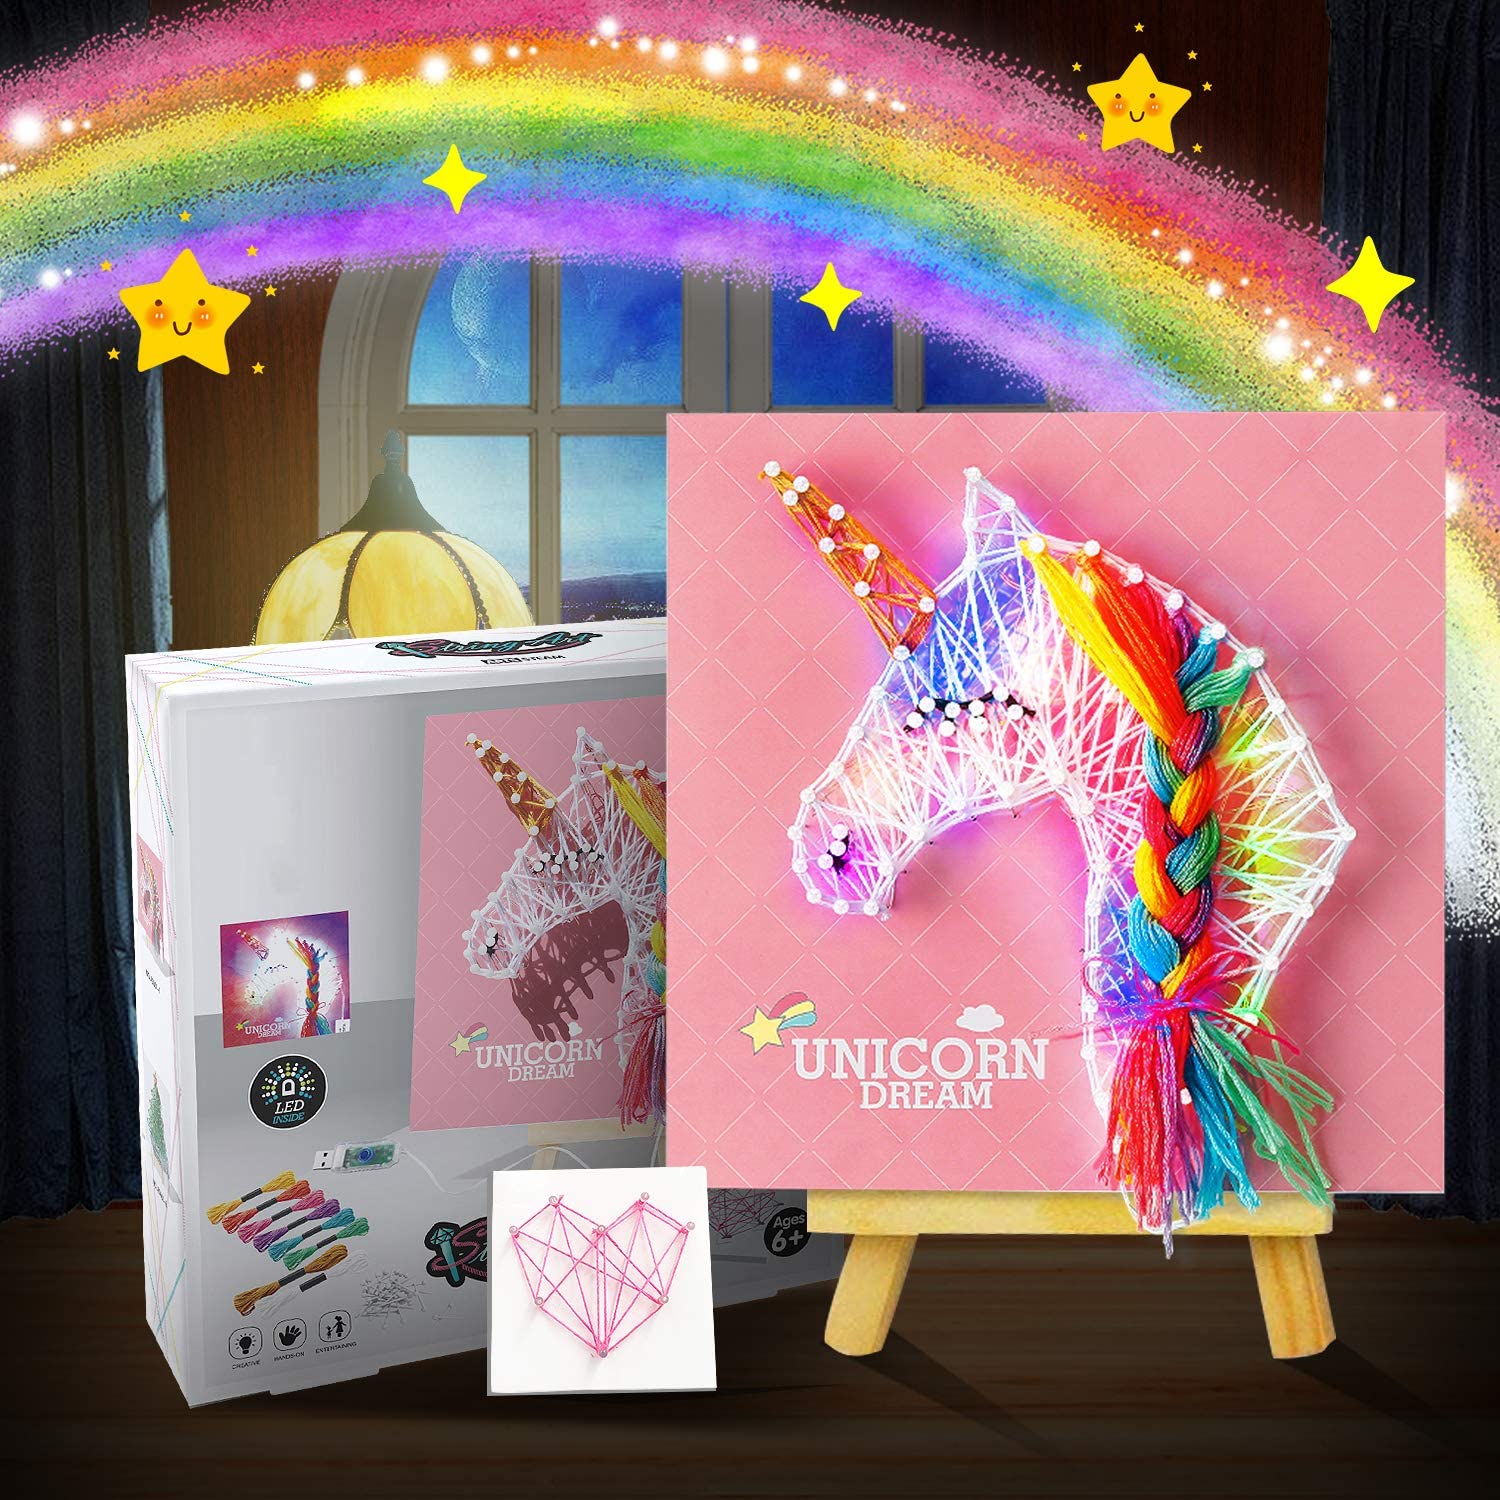 813GqaslBRL. AC SL1500 Best Gifts for 10 Year Old Girls These gifts for 10 year old girls are sure to delight any pre-teen girl who's in that in between stage!